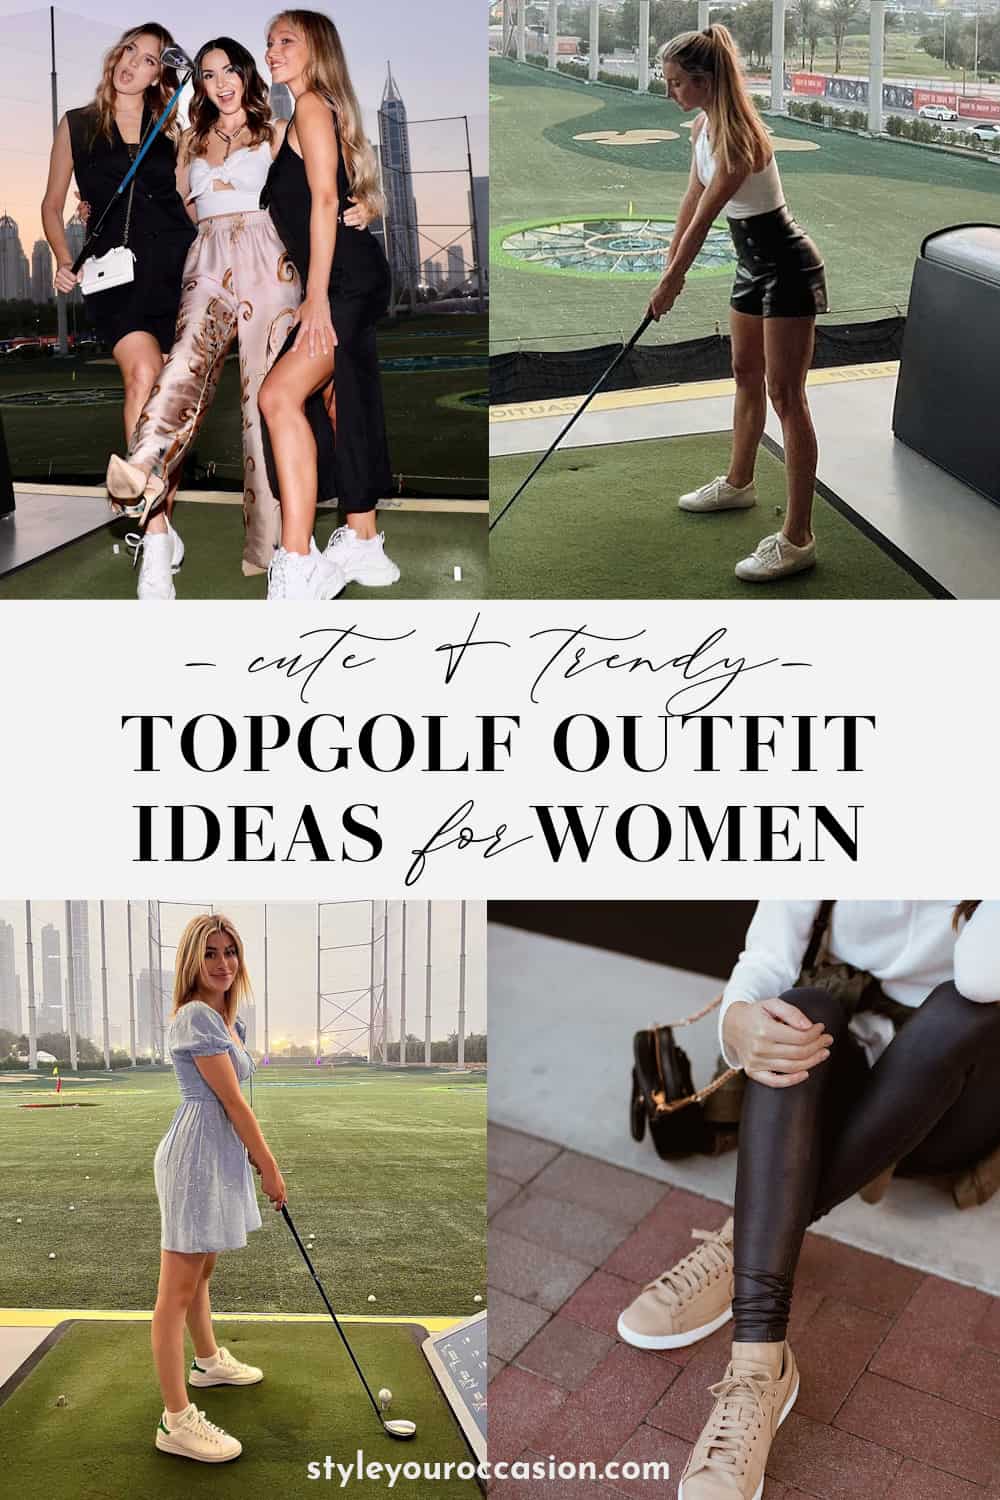 collage of images of outfits for women for what to wear to Topgolf